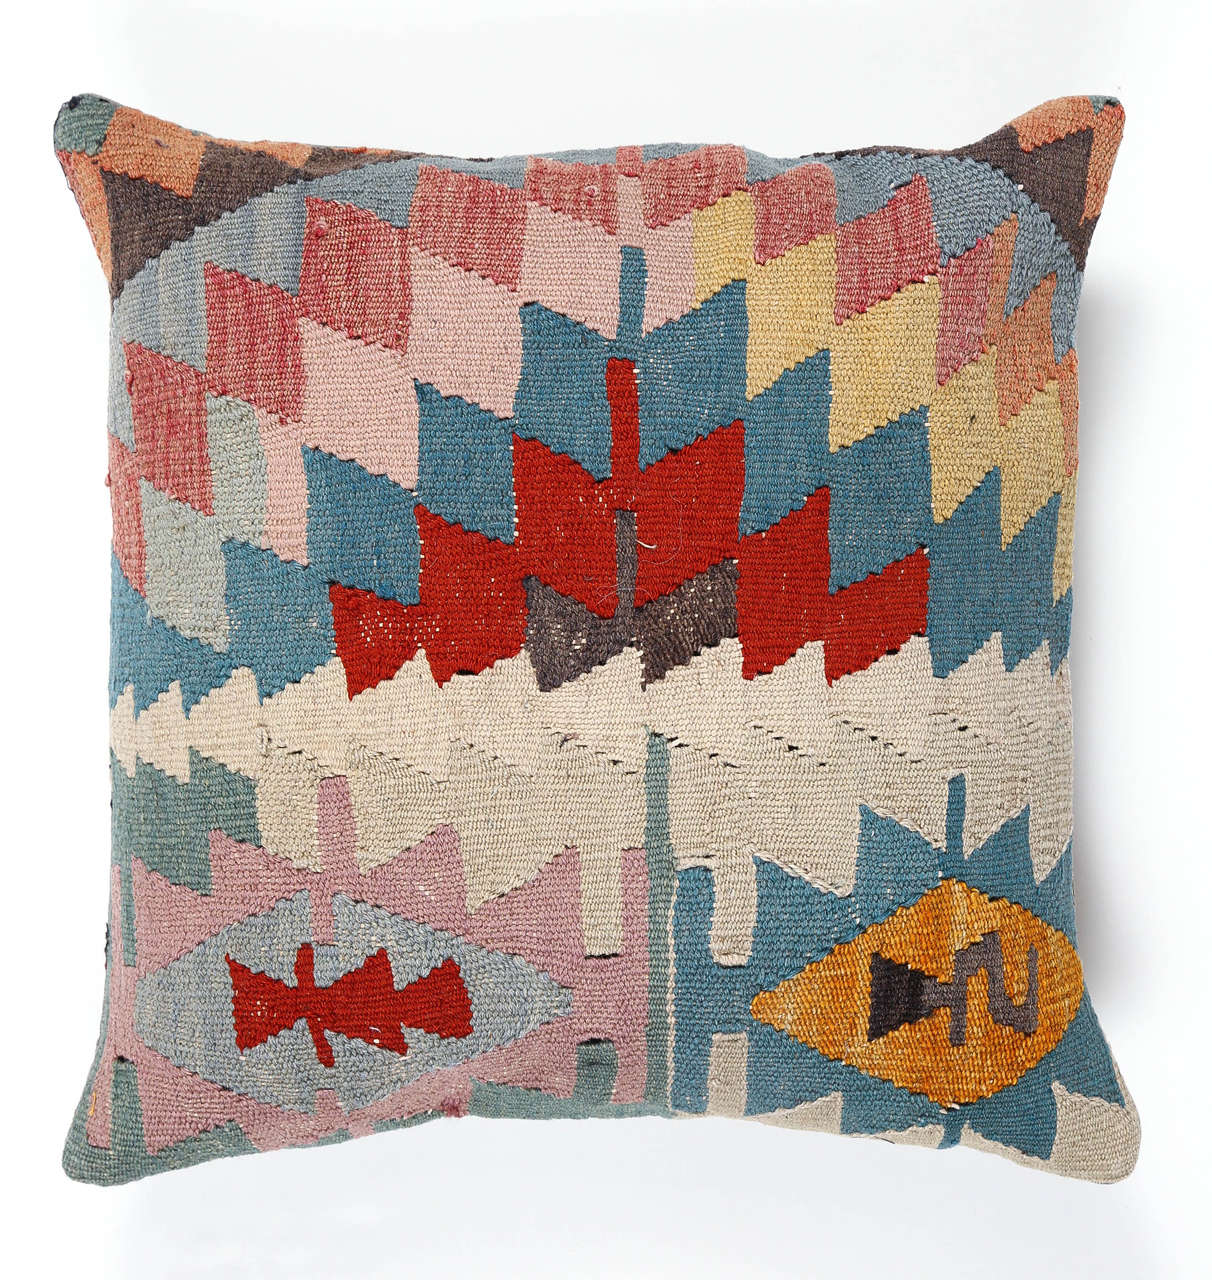 Vintage kilim pillow decorated with a geometric pattern. Solid pale blue fabric backing.